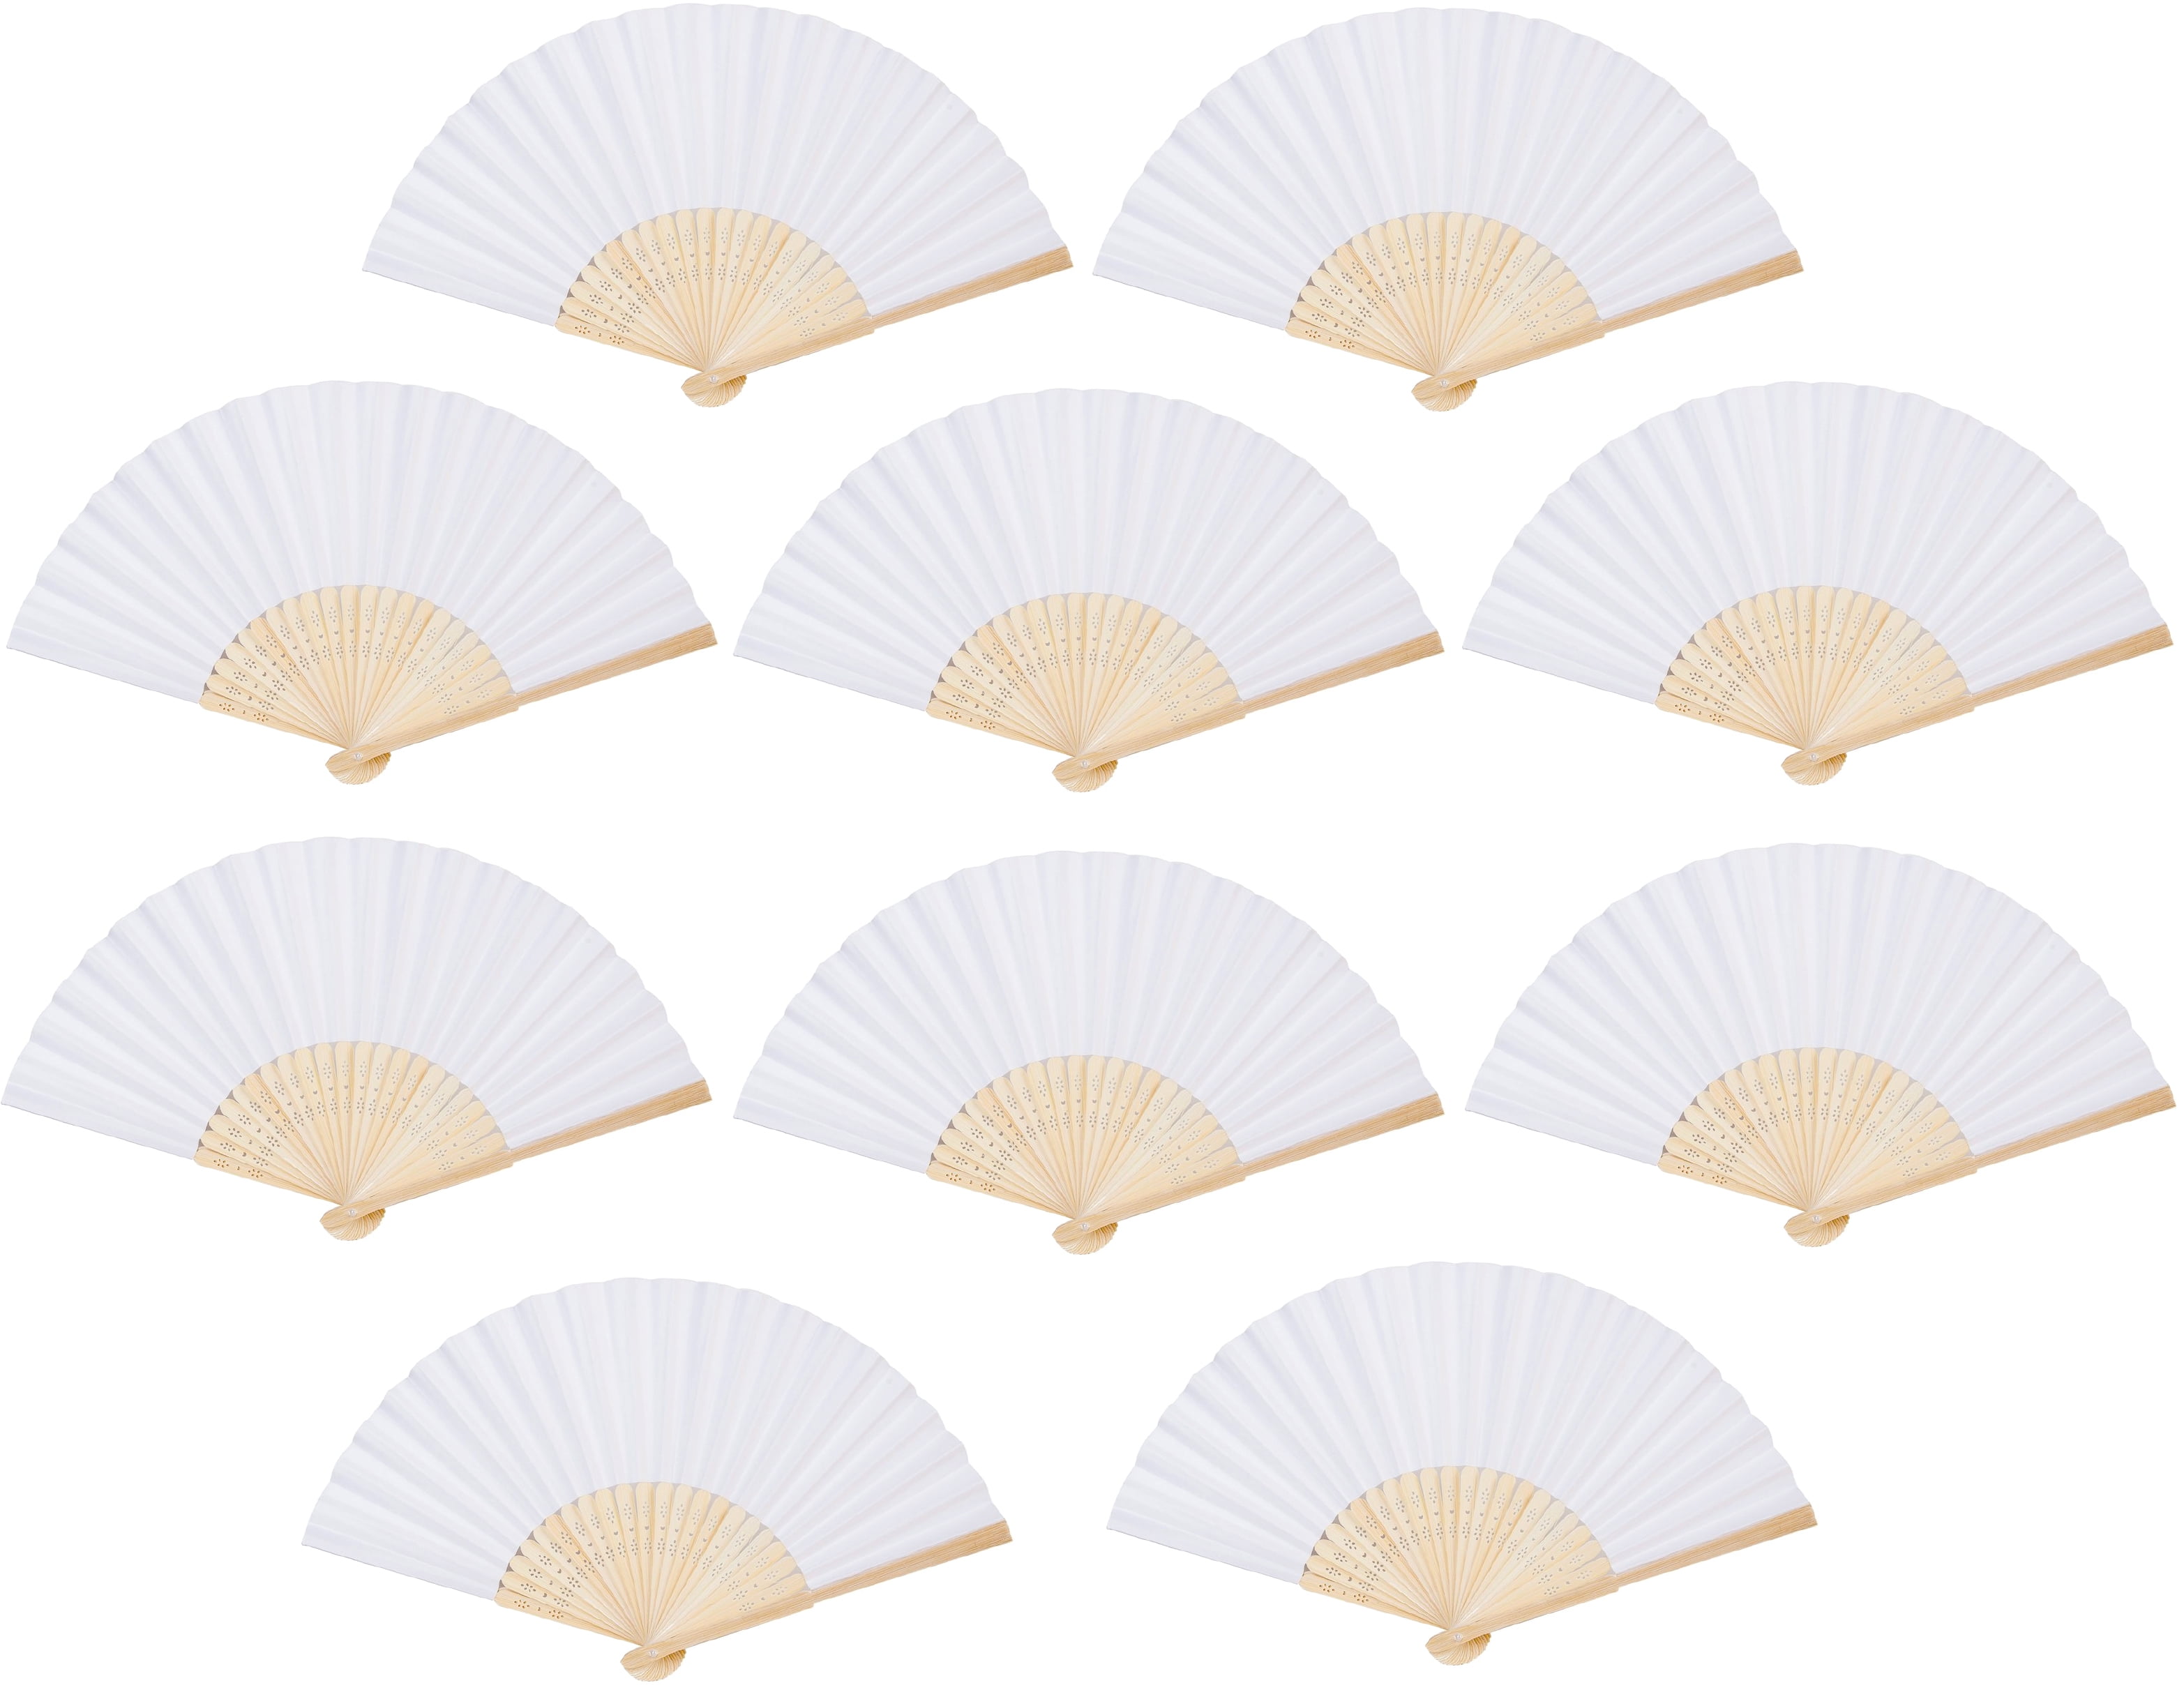 12pc Wholesale Lot Wedding Party Favor Gift Spanish Party Dance Summer Hand Fan 